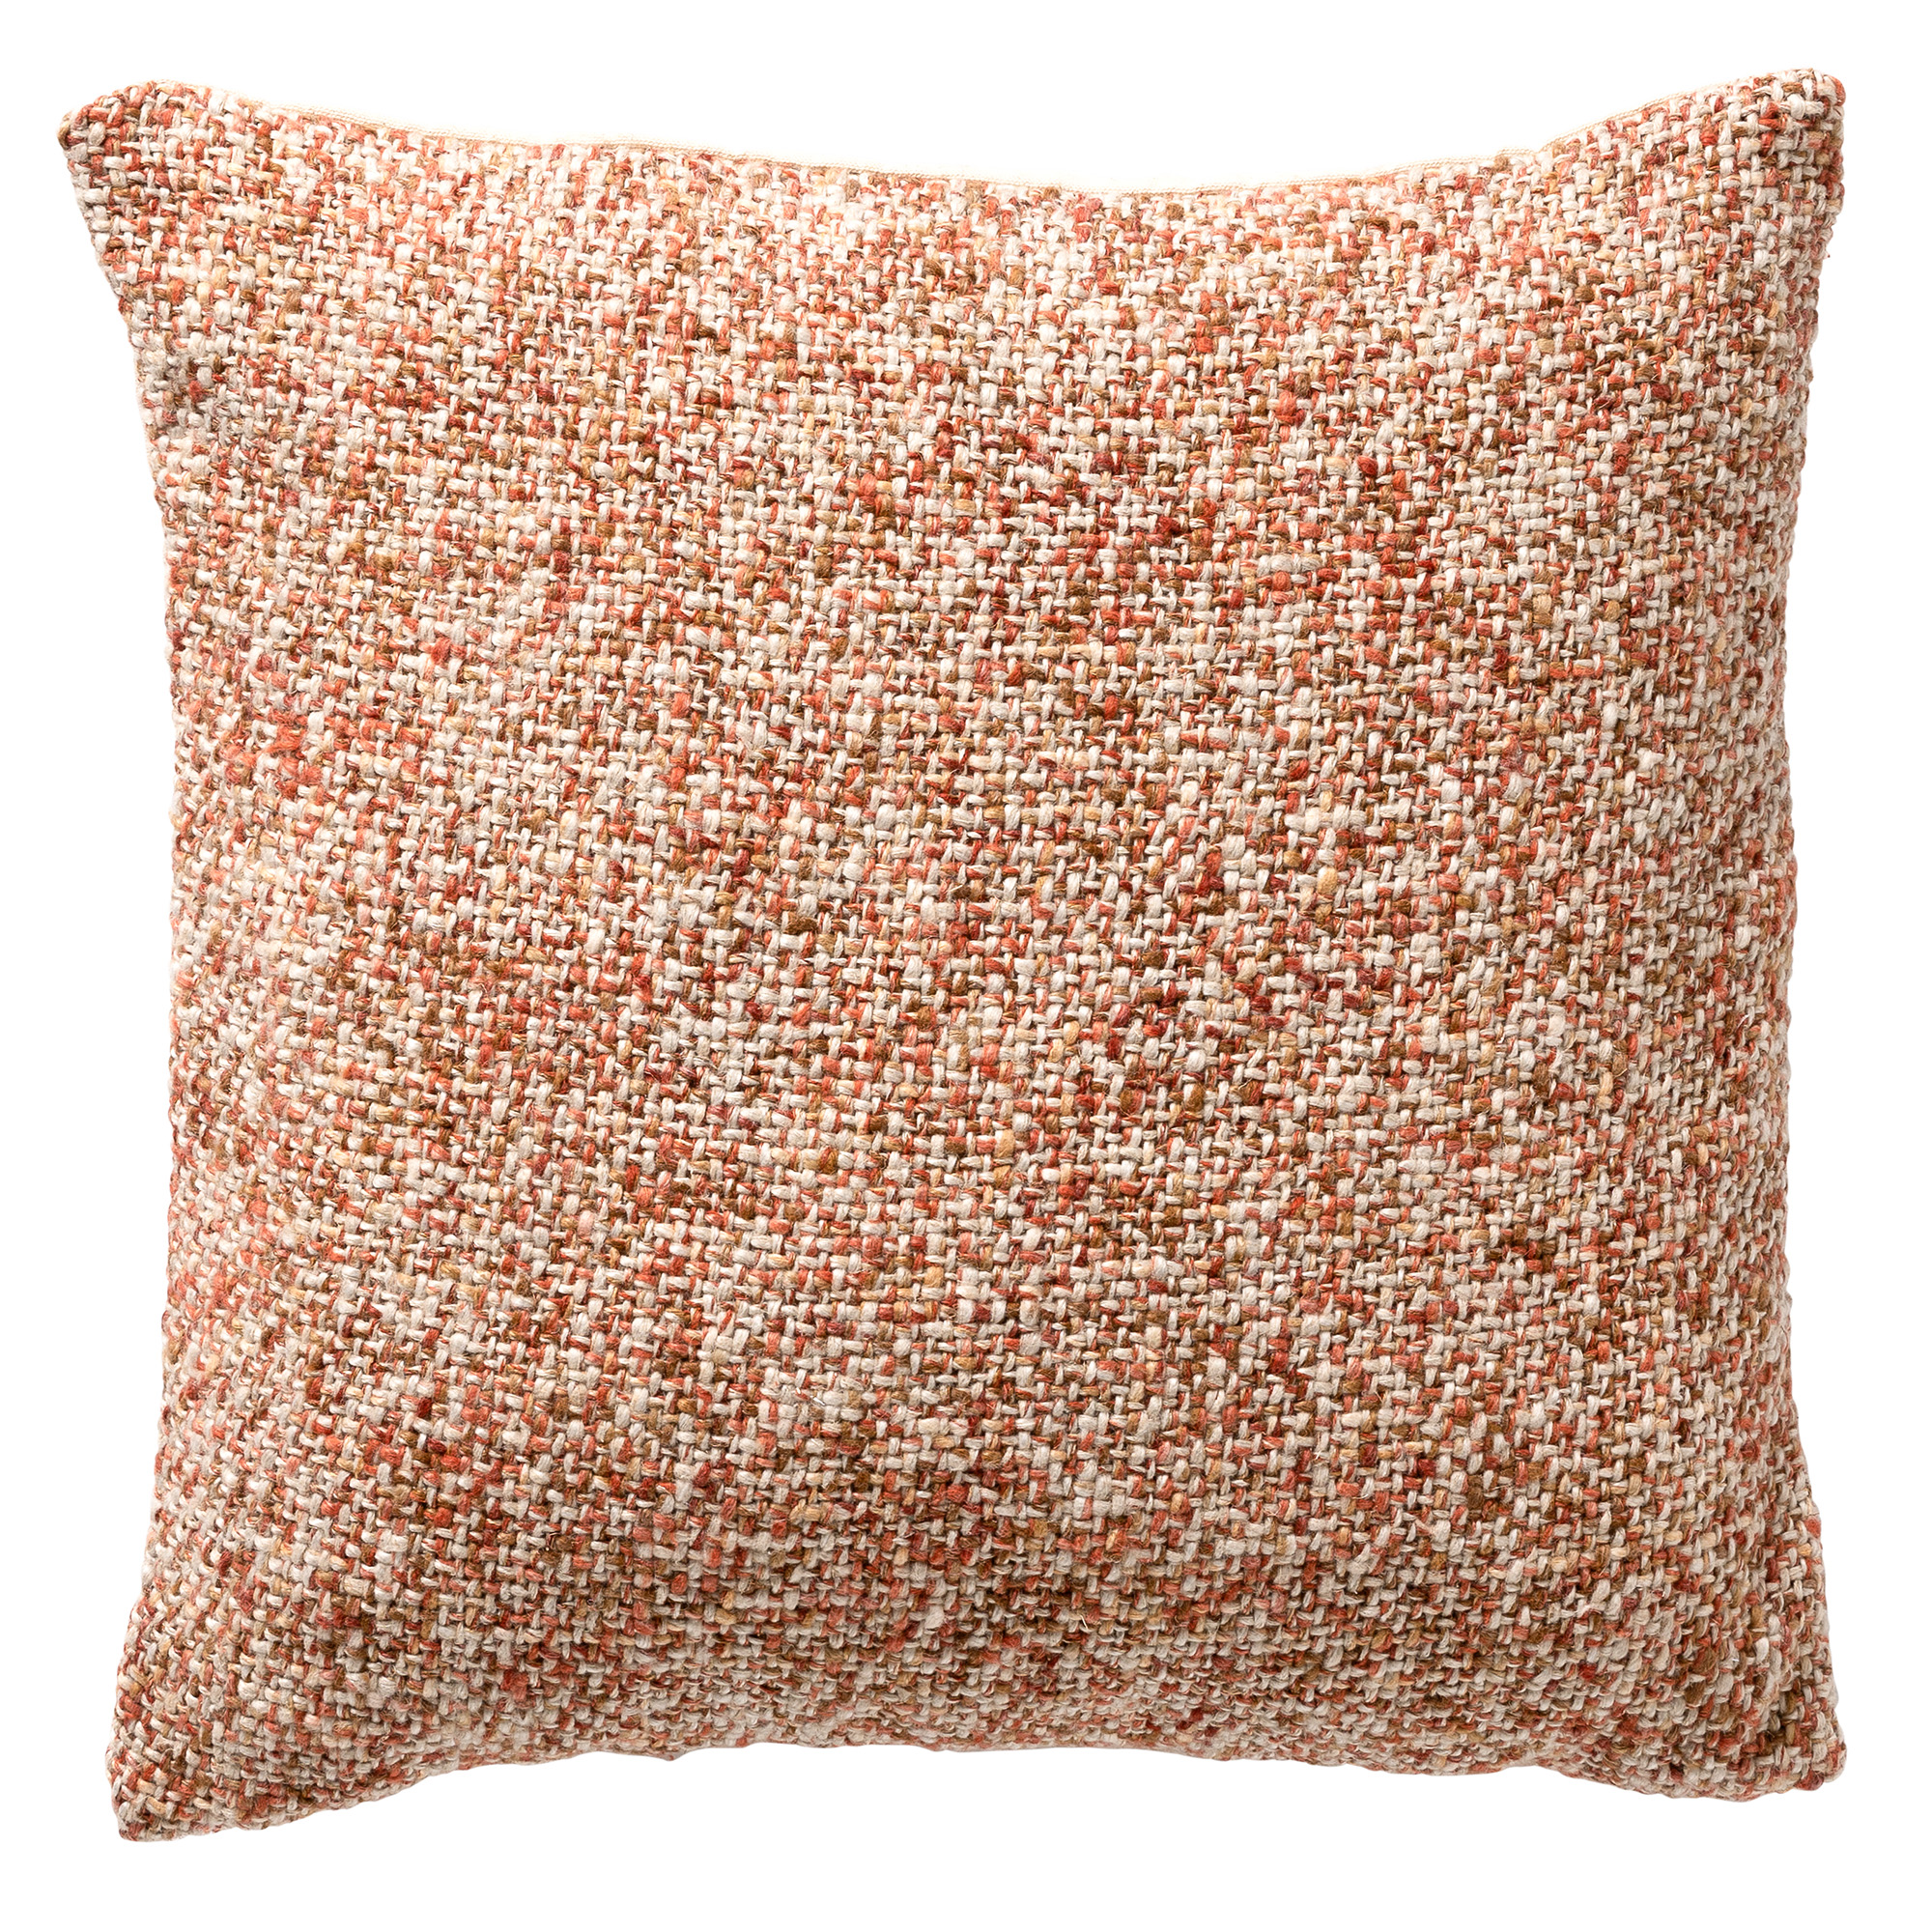 JOEY - Cushion 45x45 cm - with cushion cover made of 70% gereclycled cotton - Potters Clay - orange